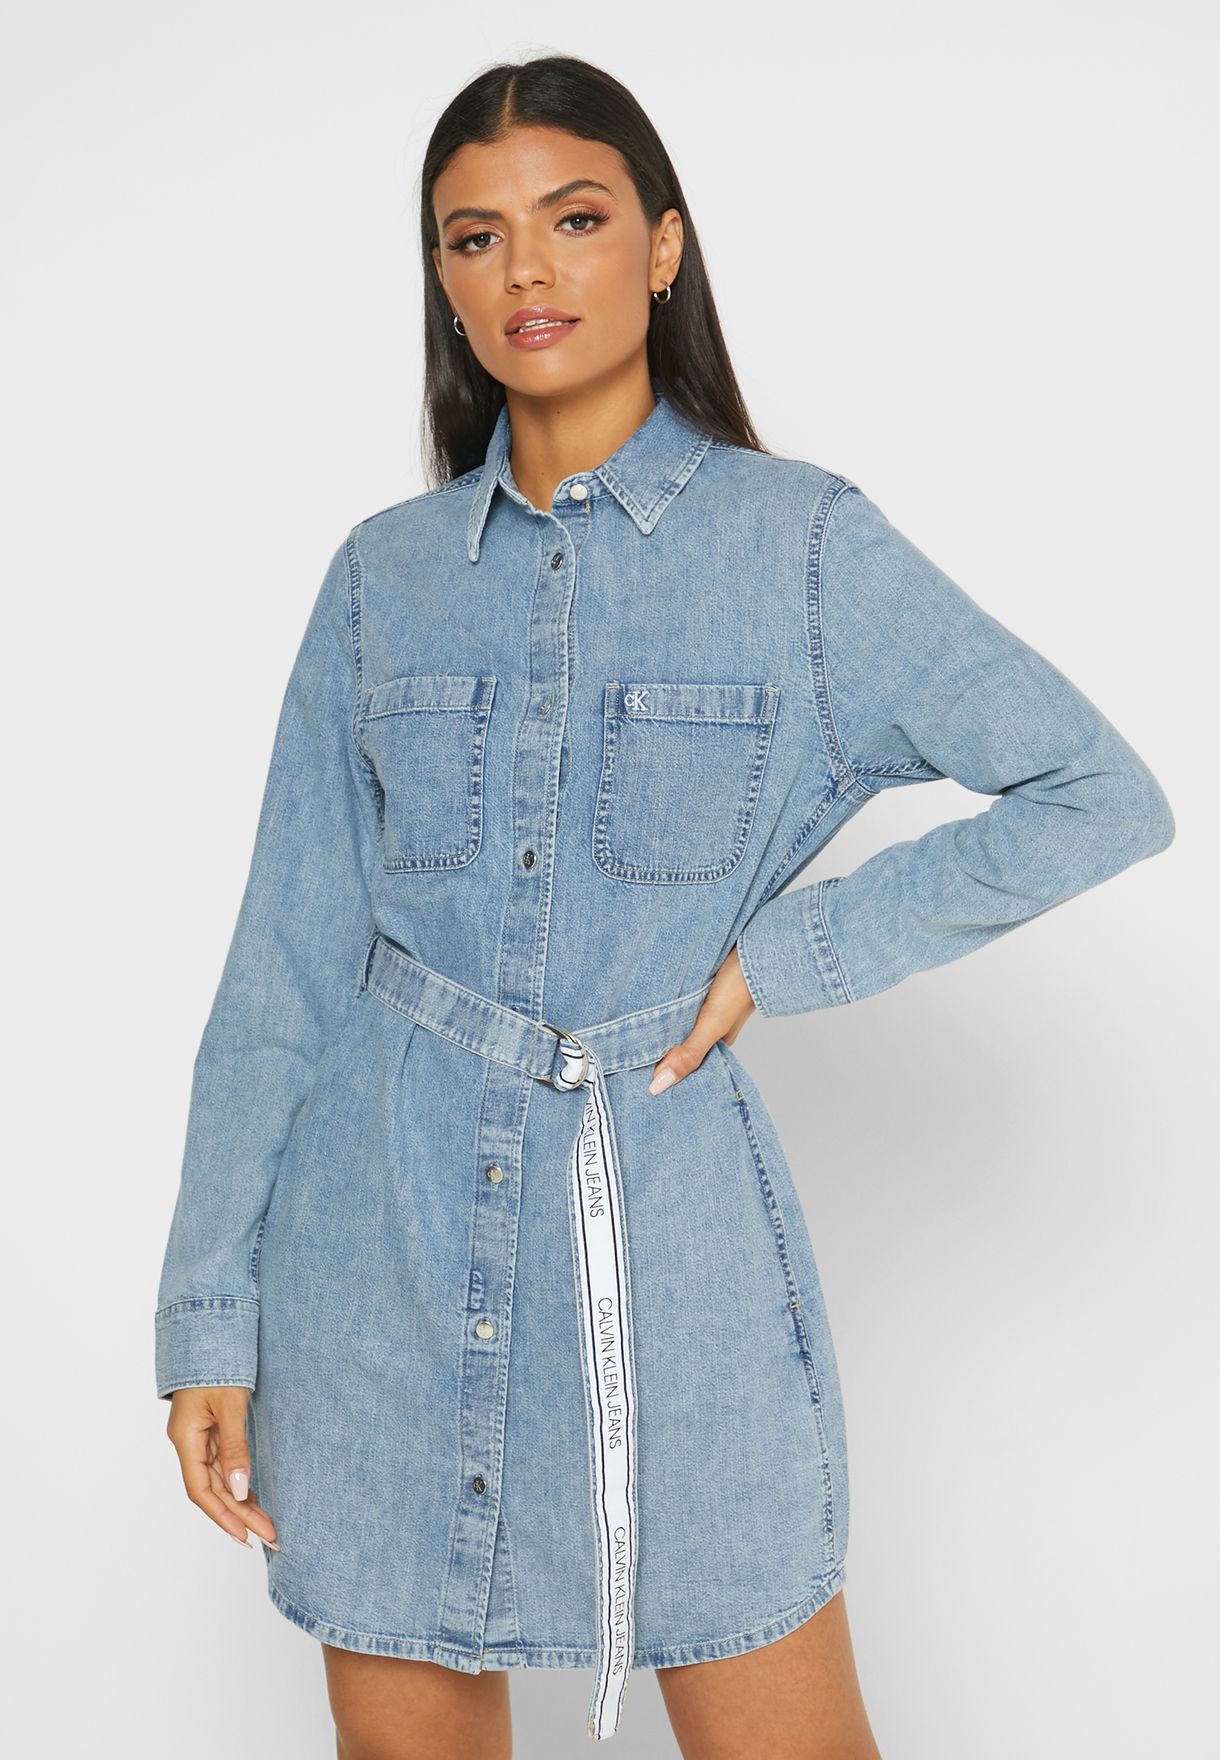 shirt dress and jeans